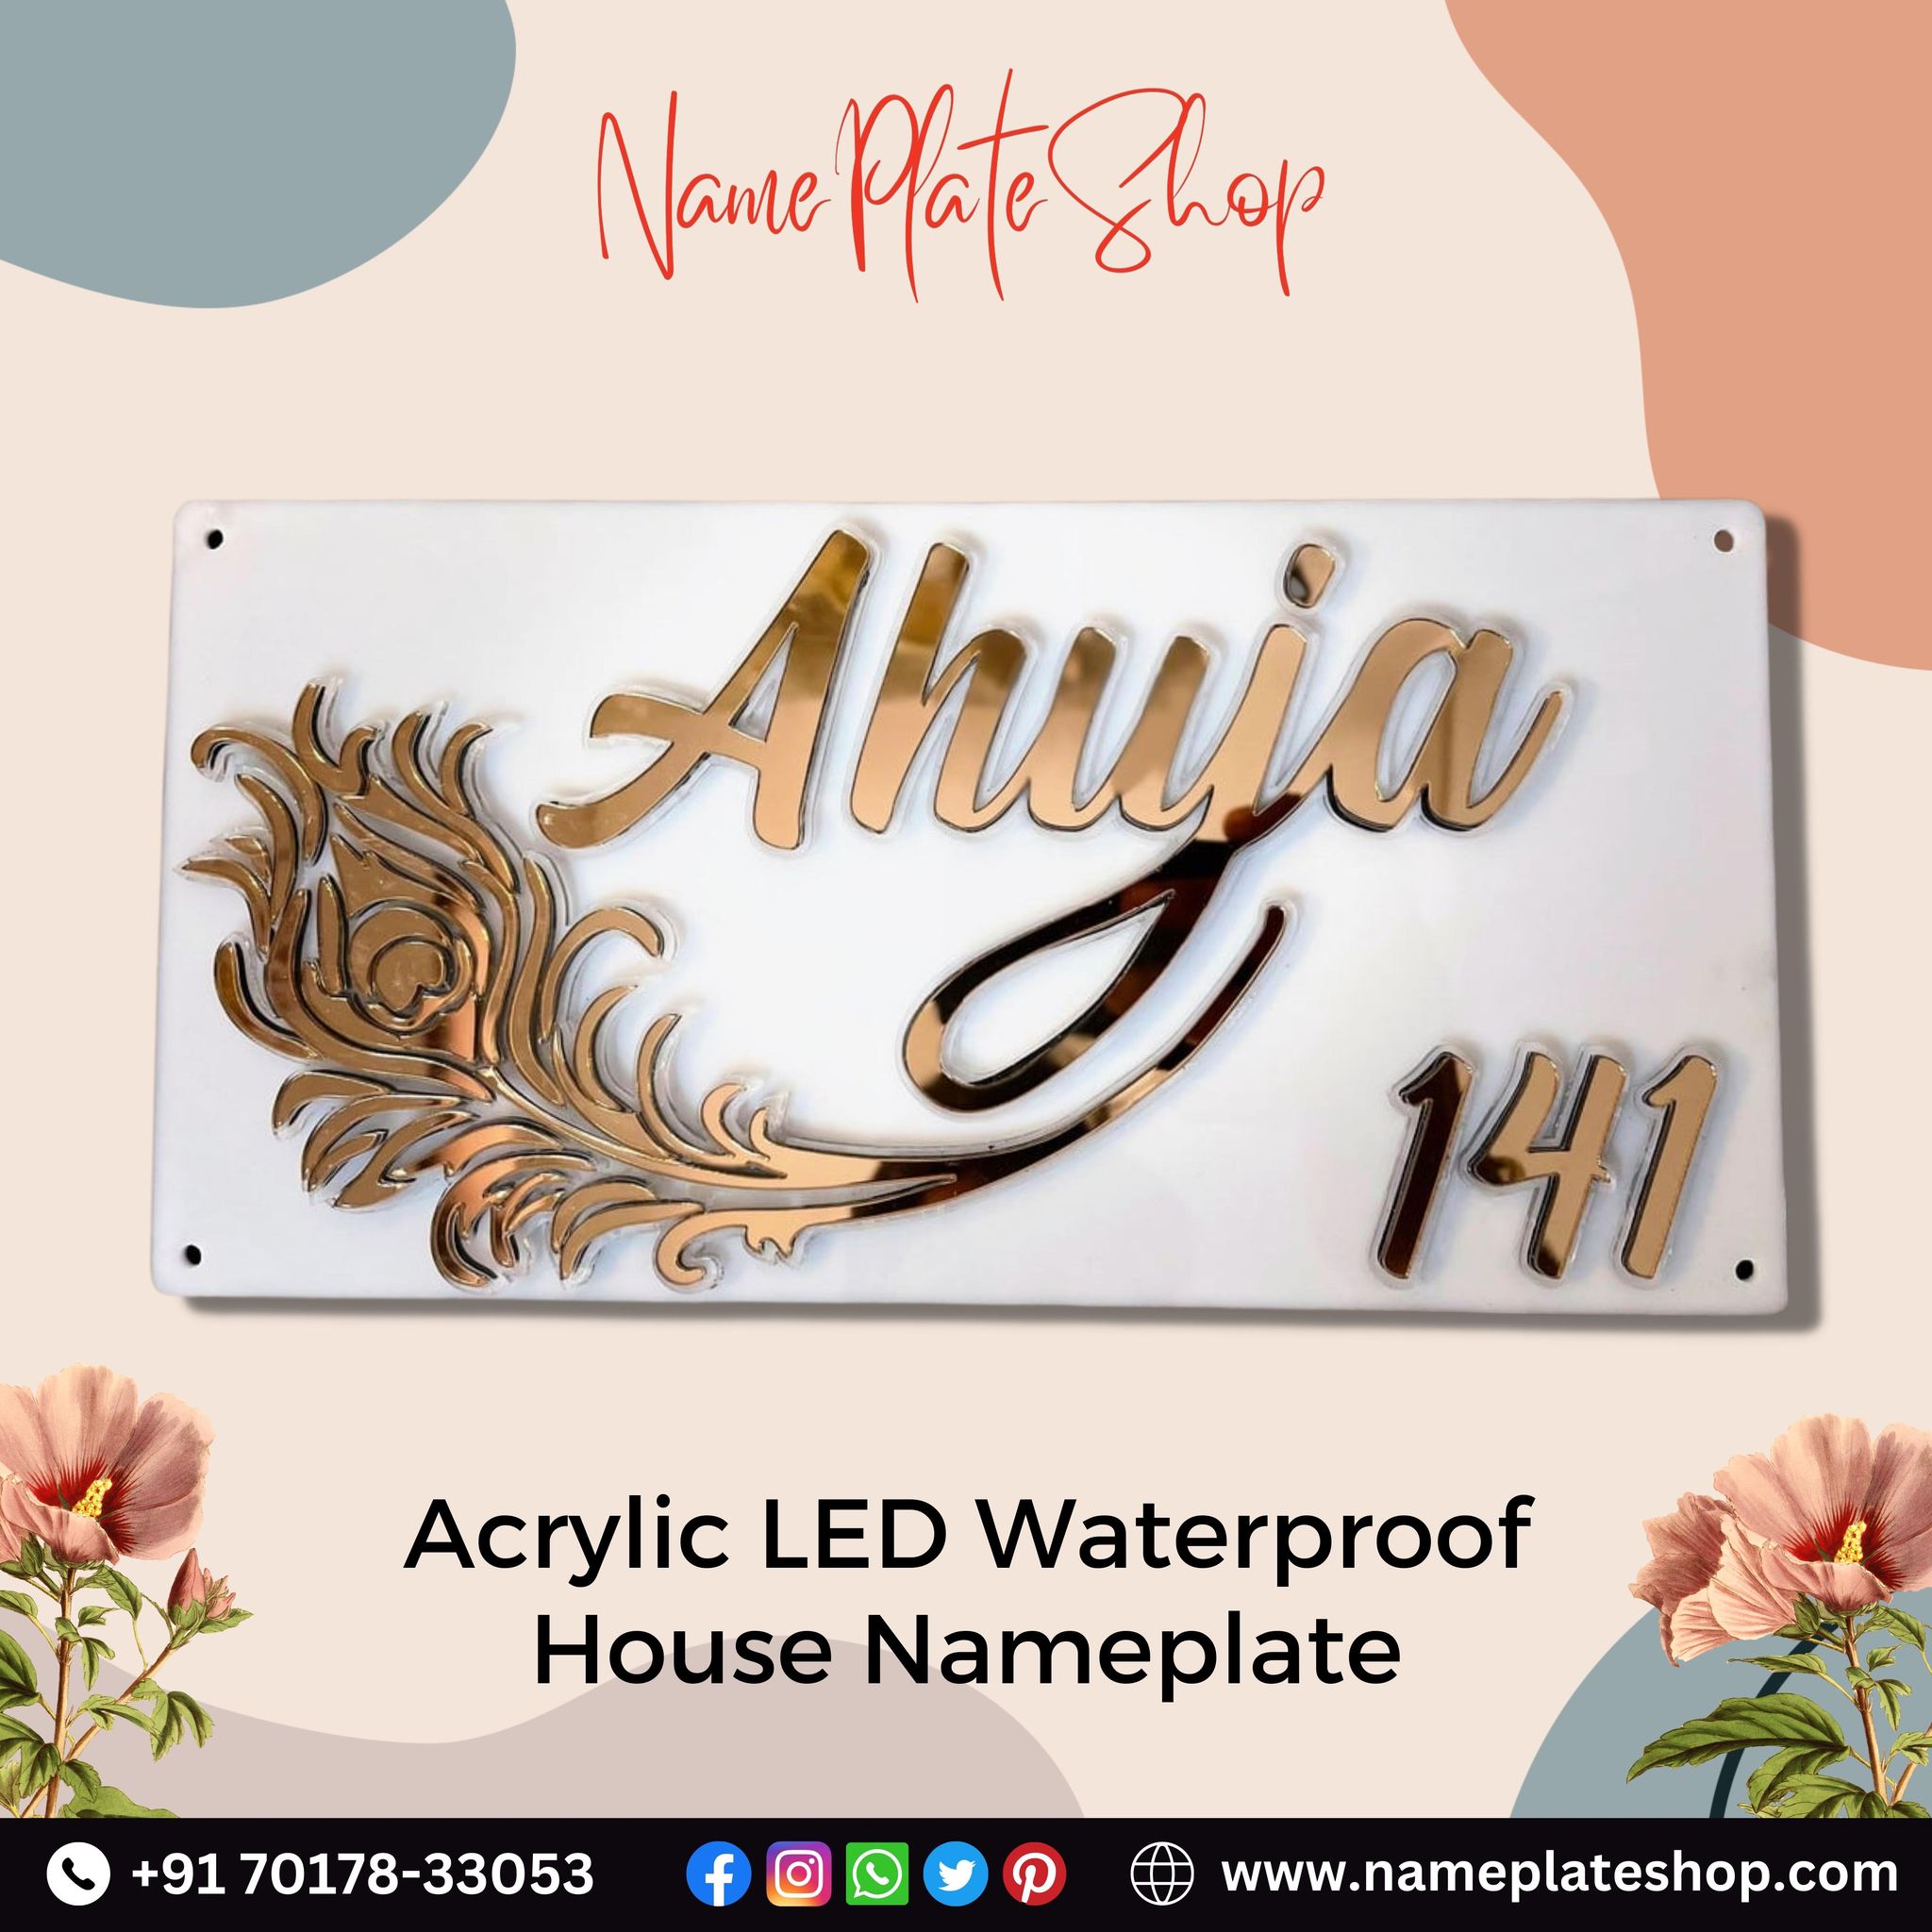 Illuminate Your Home with Style The Ultimate Guide to Acrylic LED Waterproof House Nameplates